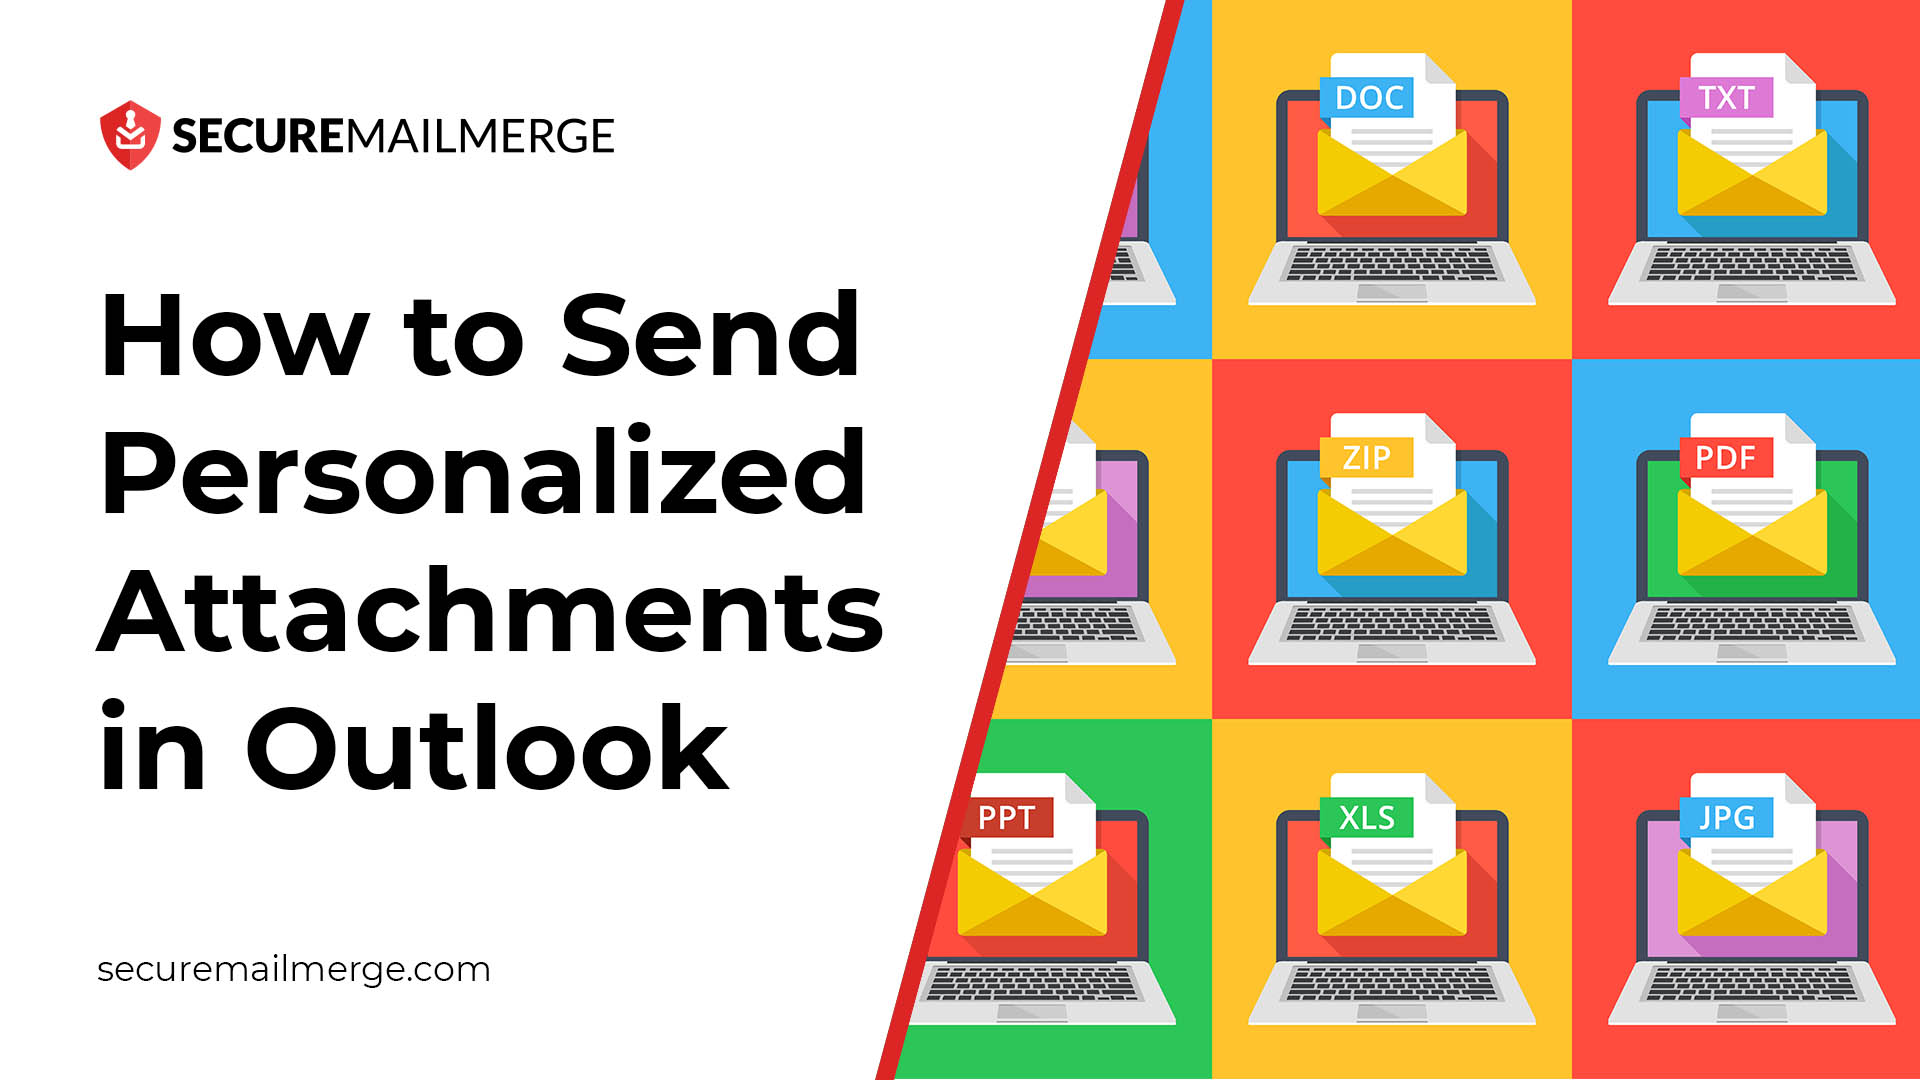 How to Send Personalized Attachments in Outlook